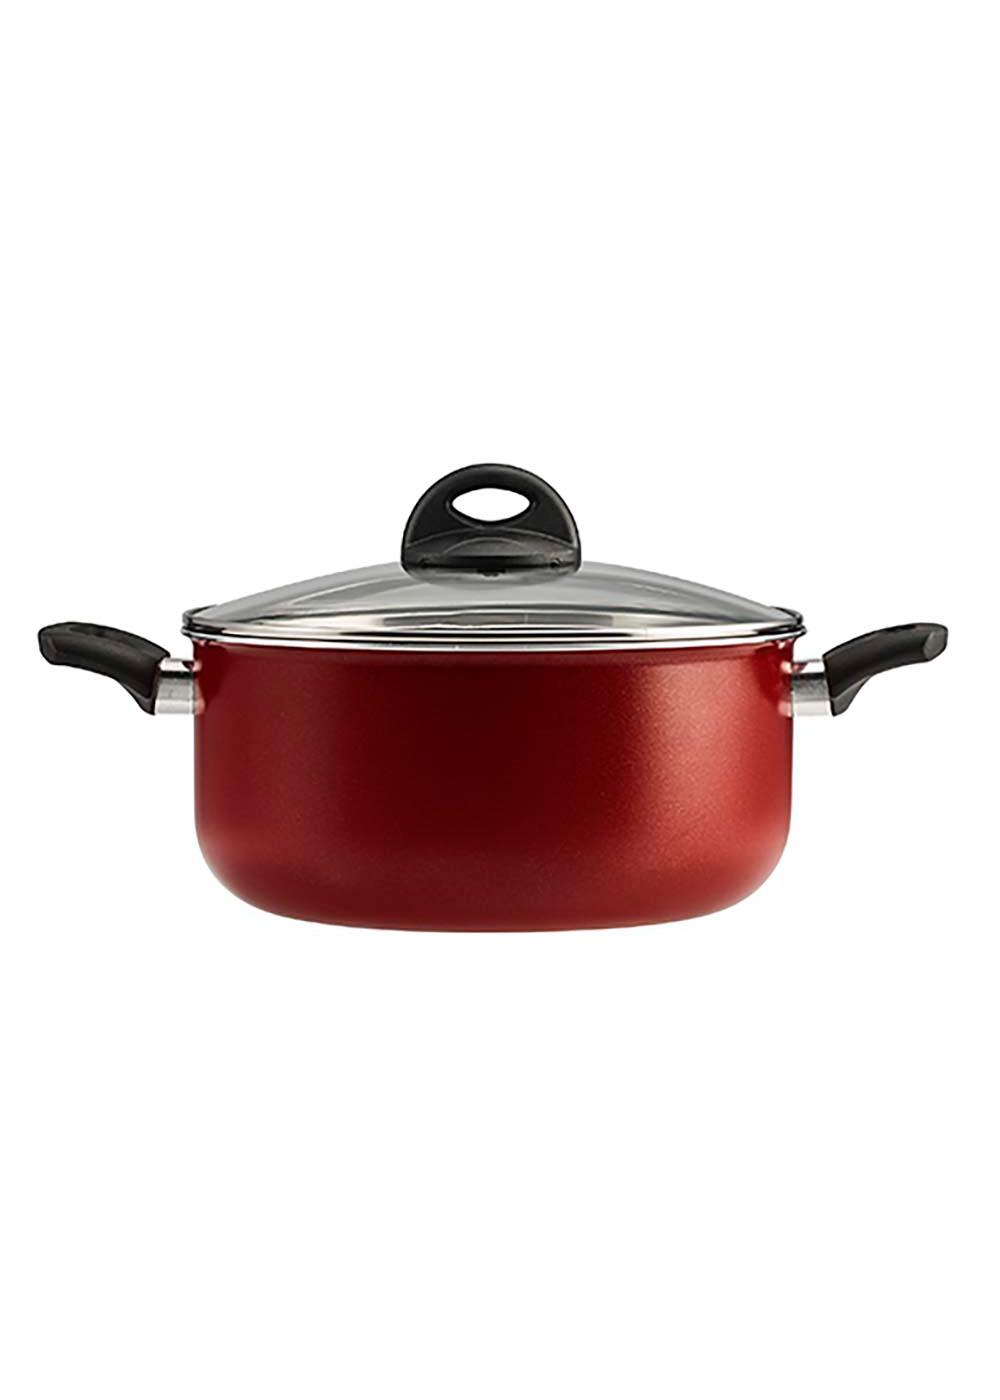 Tramontina Non-Stick Red Cookware Set; image 6 of 14